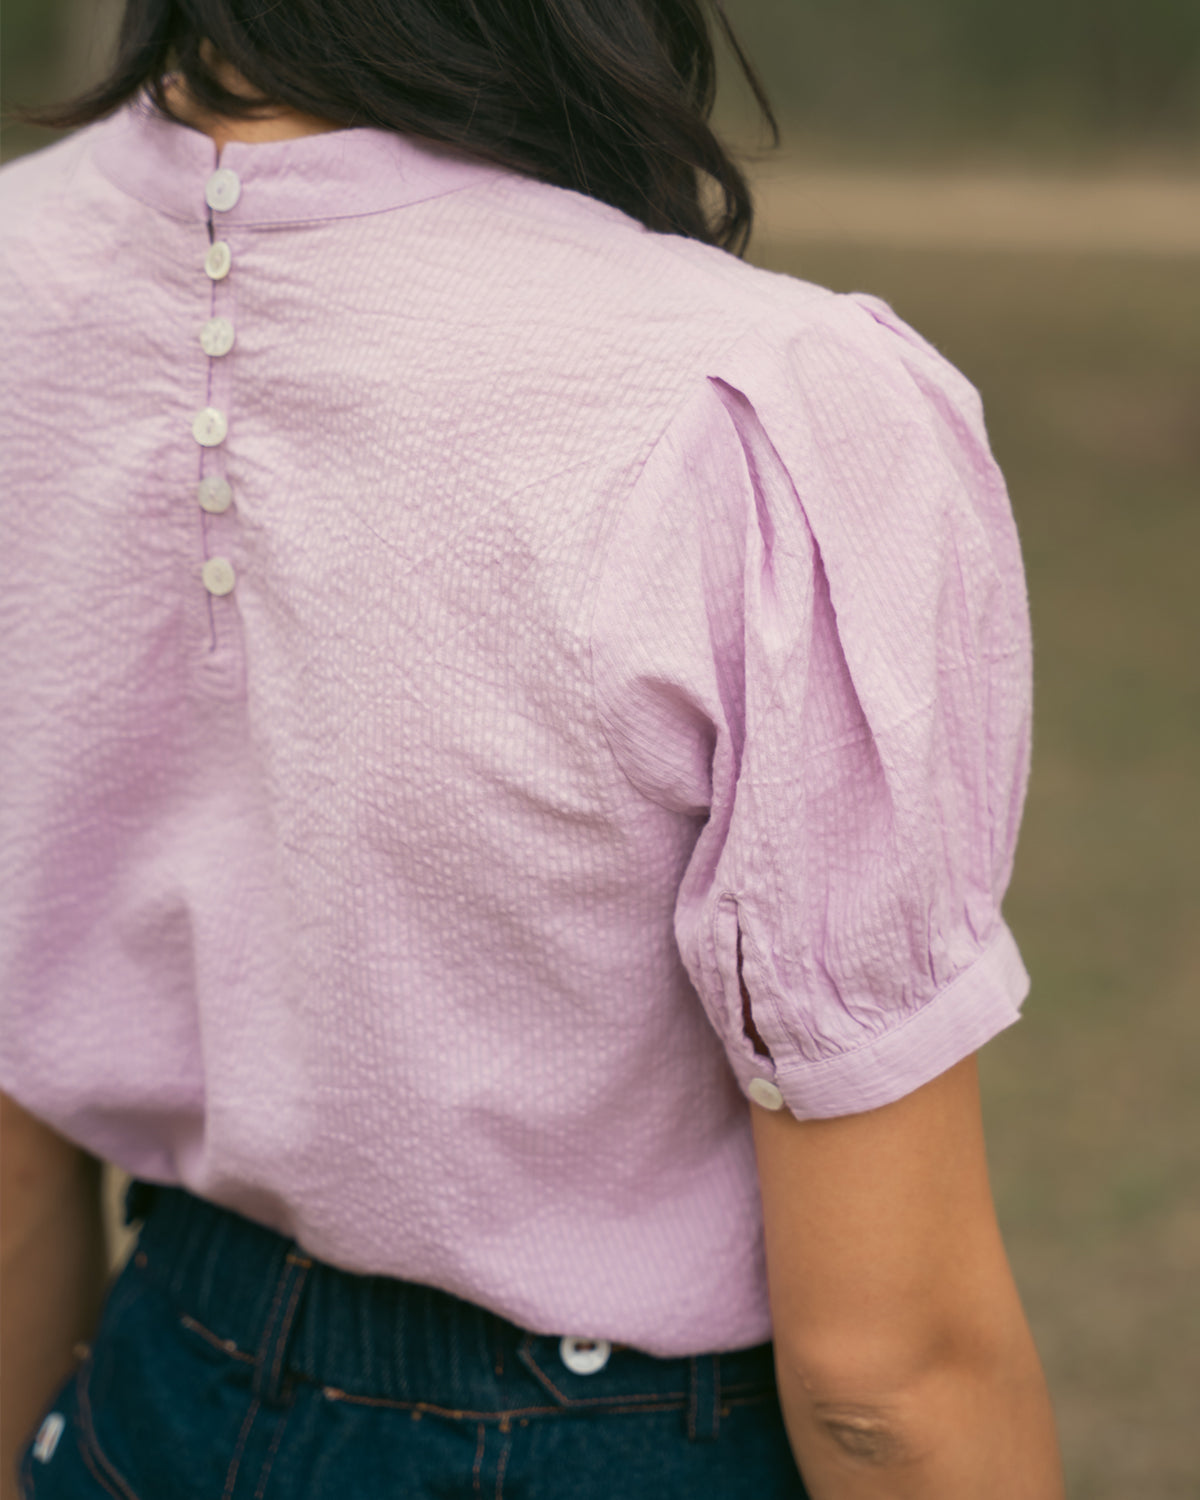 vintage inspired women’s blouse with button back details and soft cotton fabric